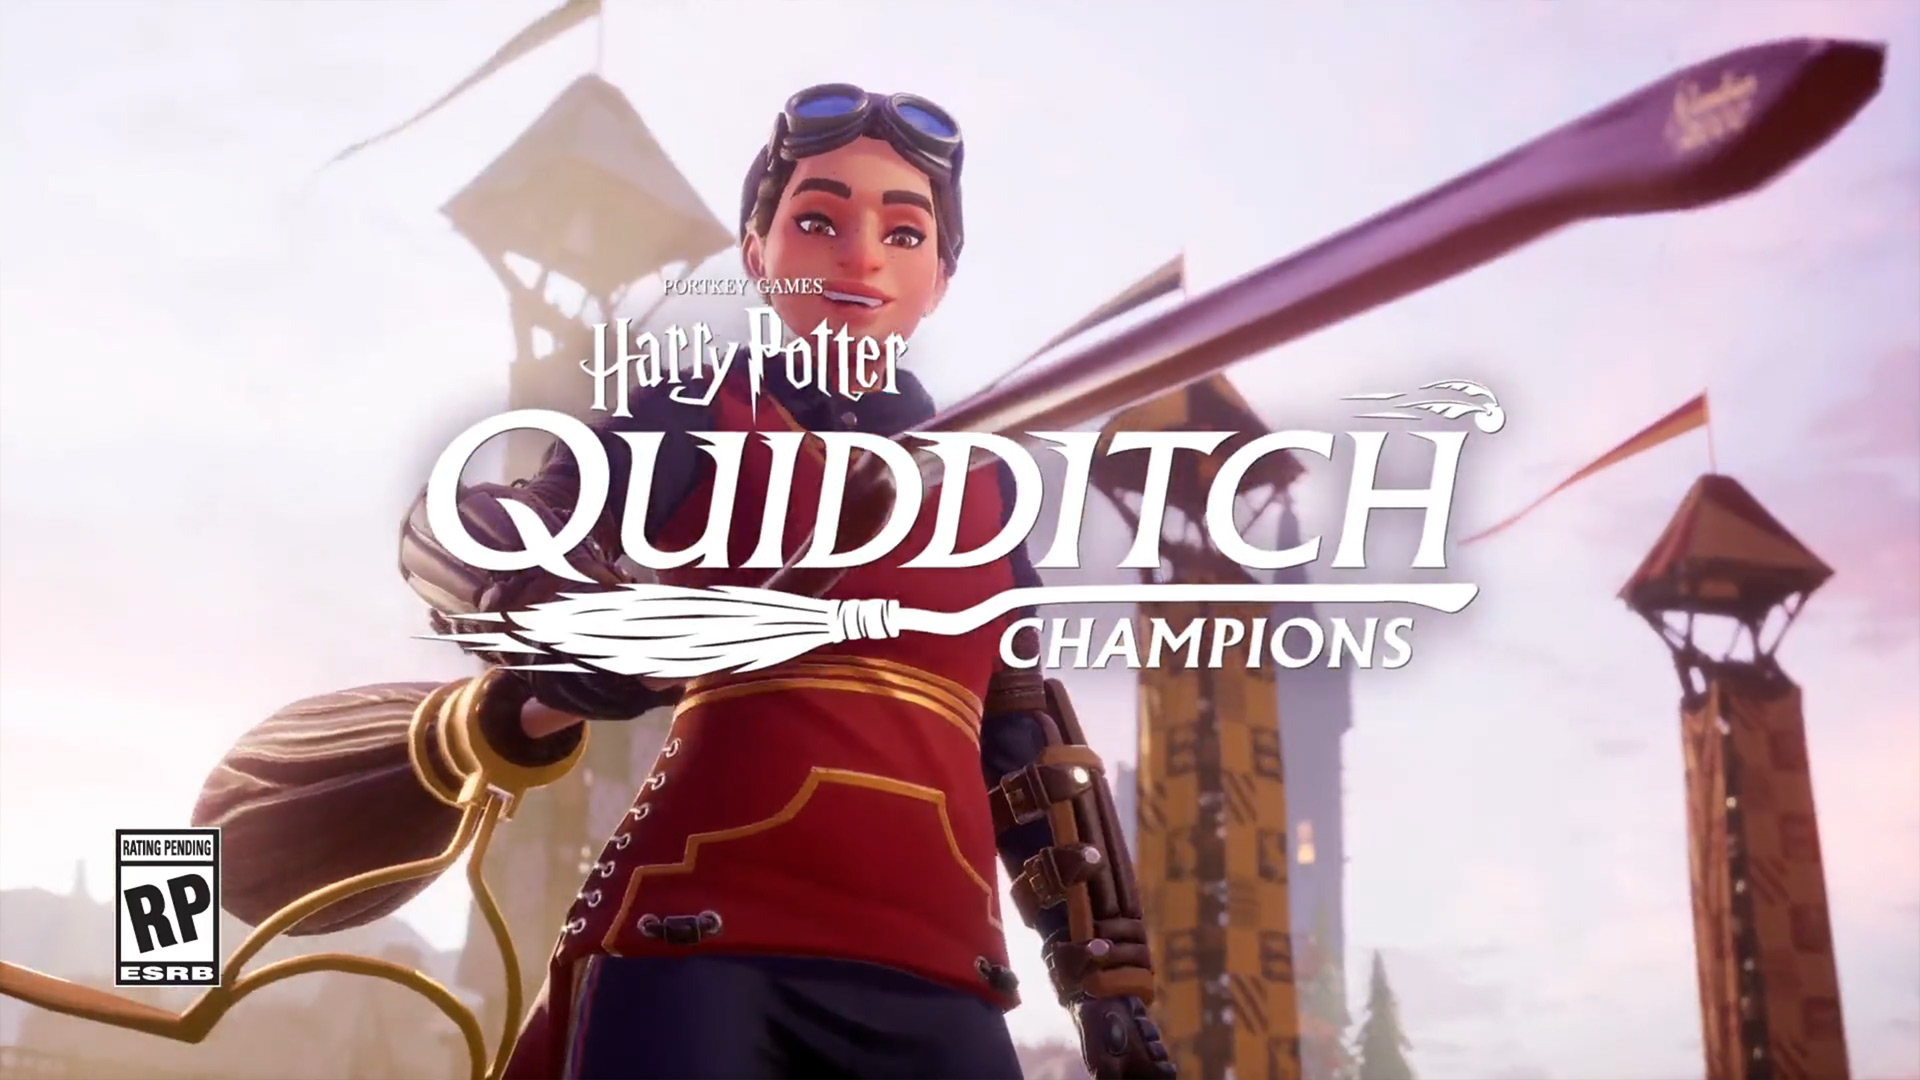 Harry Potter Quidditch Champions announced